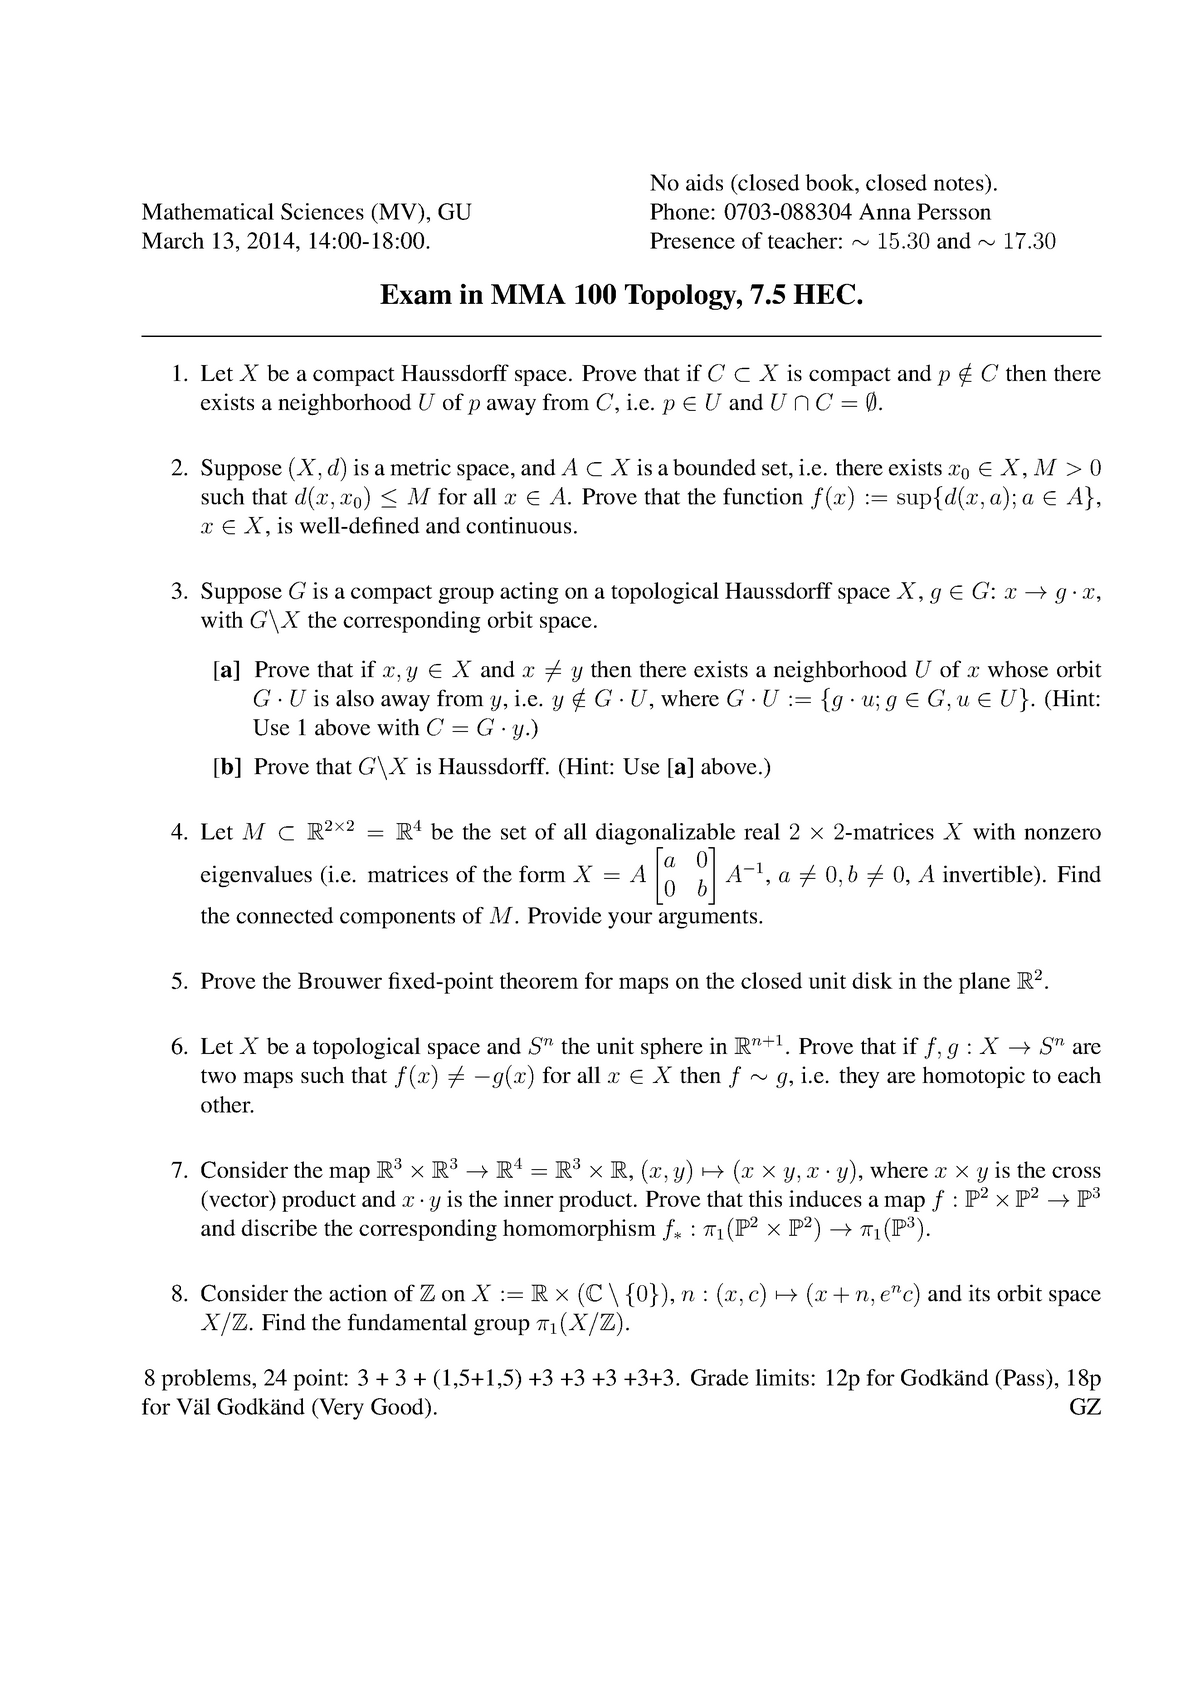 Exam 13 March 14 Questions And Answers Studocu